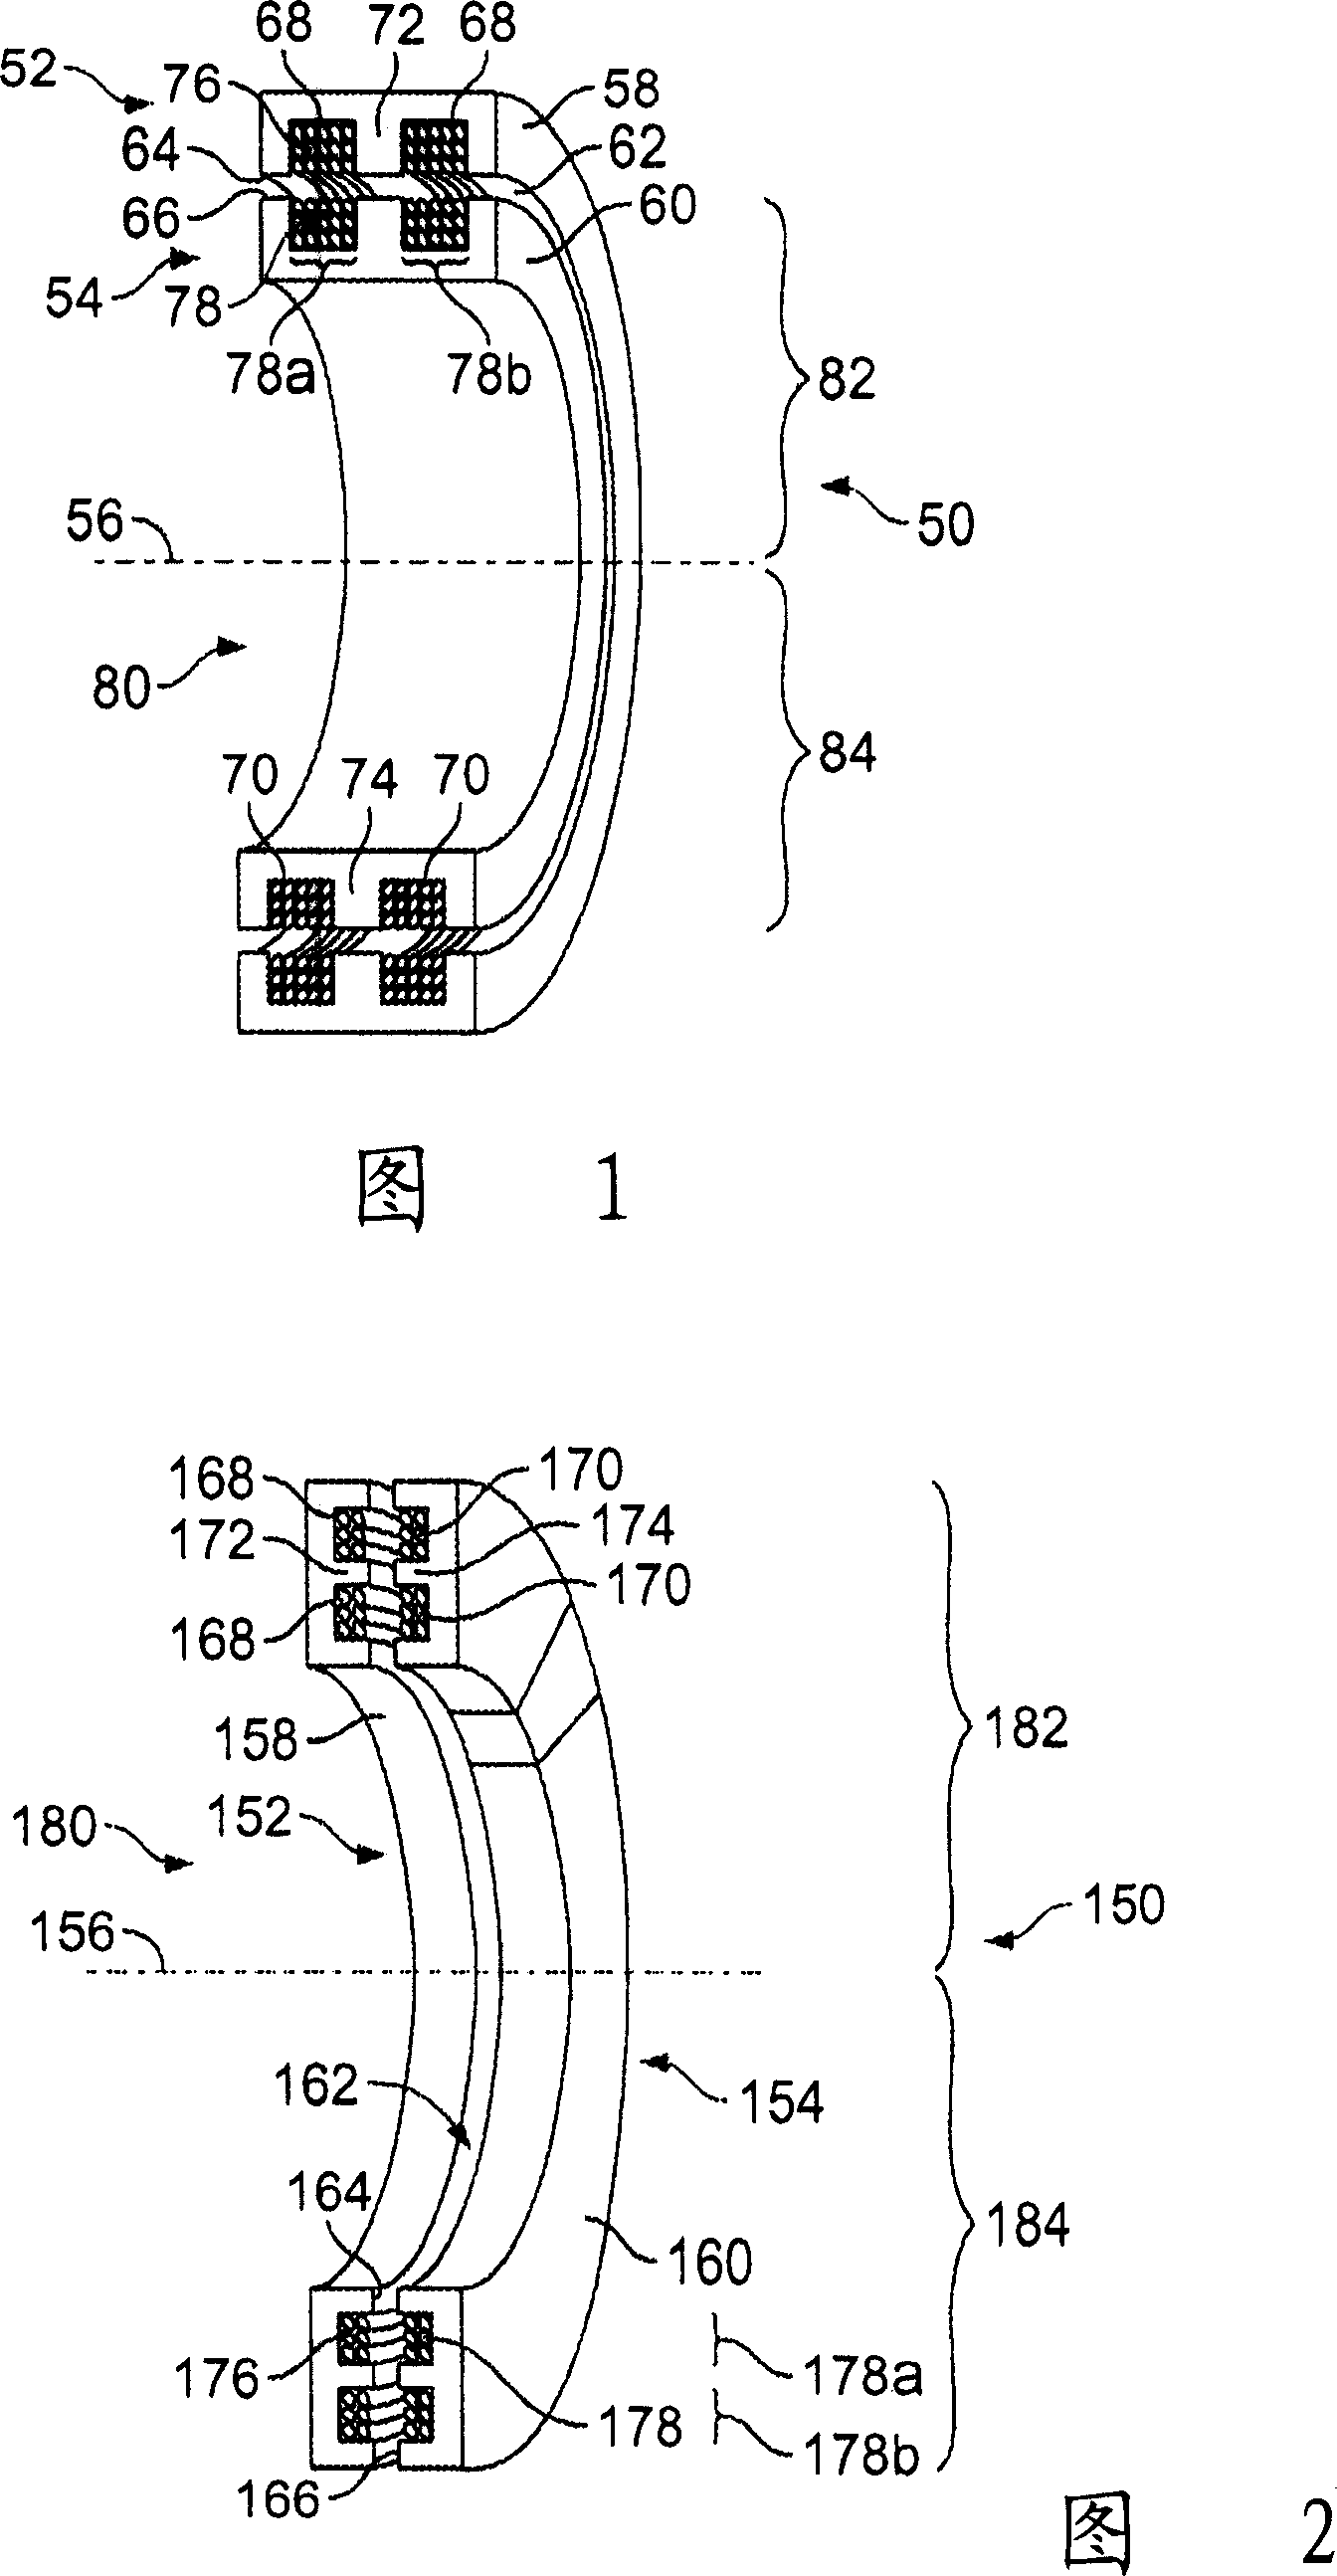 Contactless power transfer system